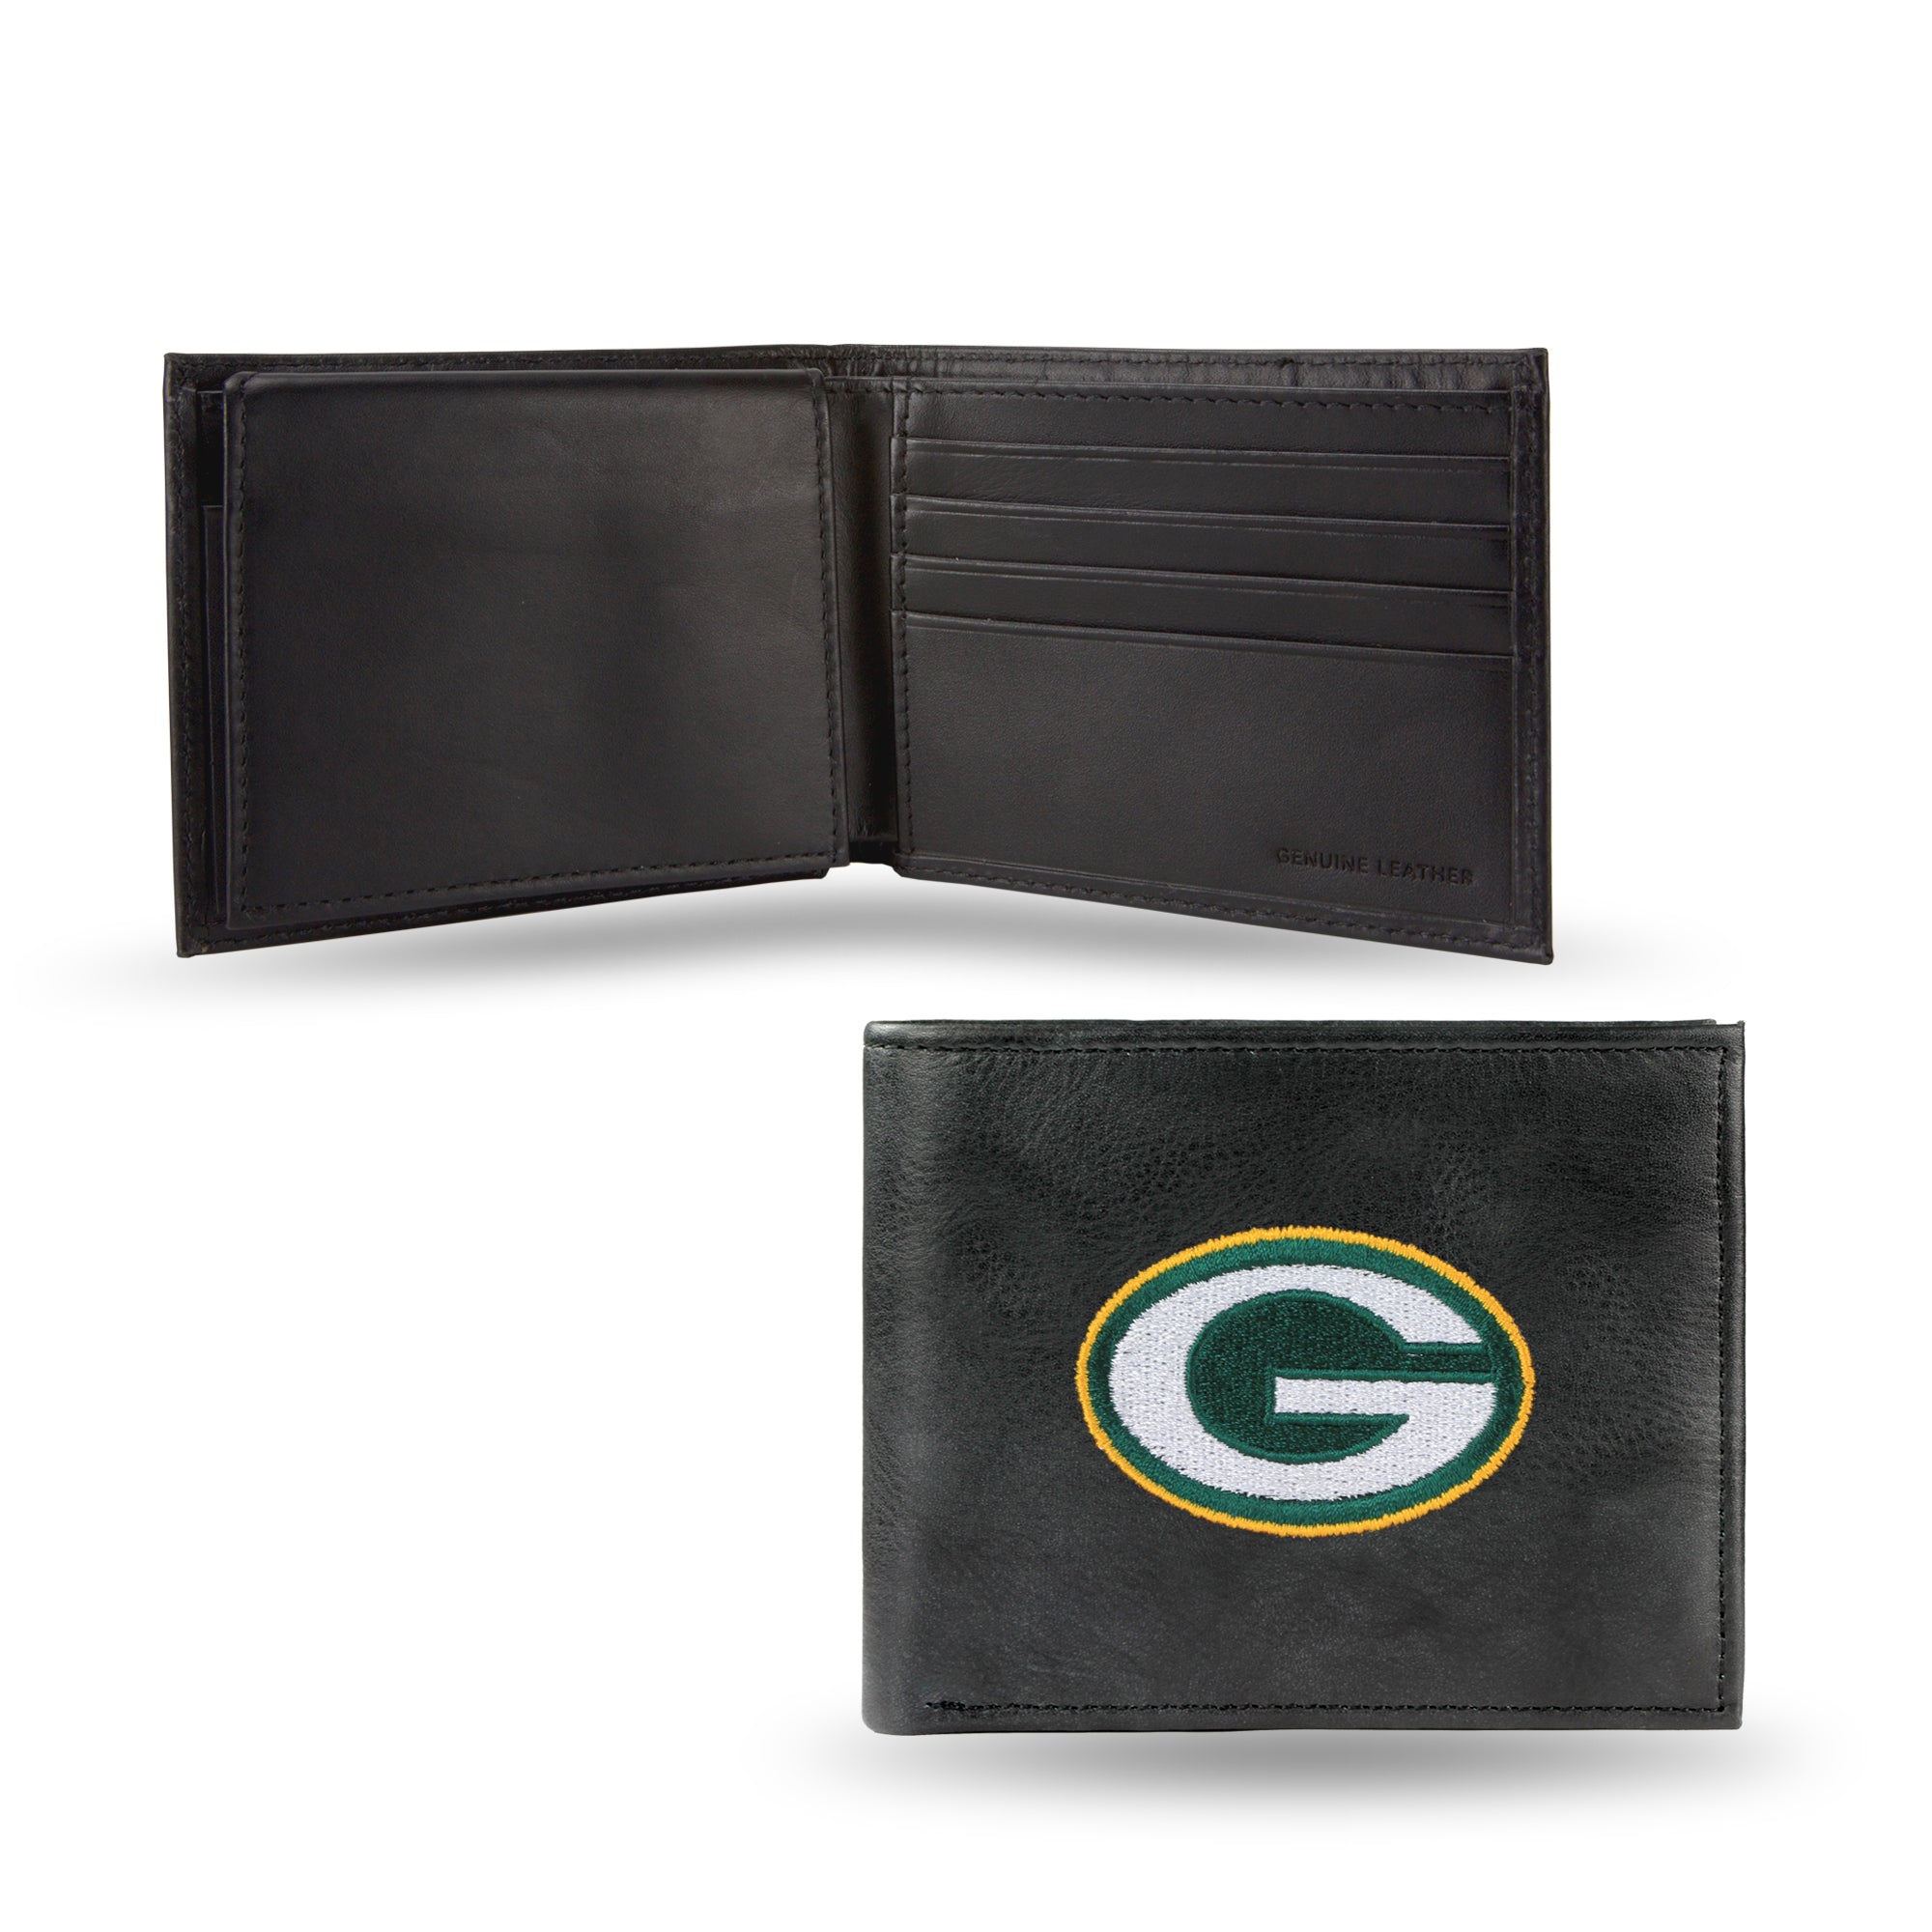 Green Bay Packers Embroidered Billfold Wallet